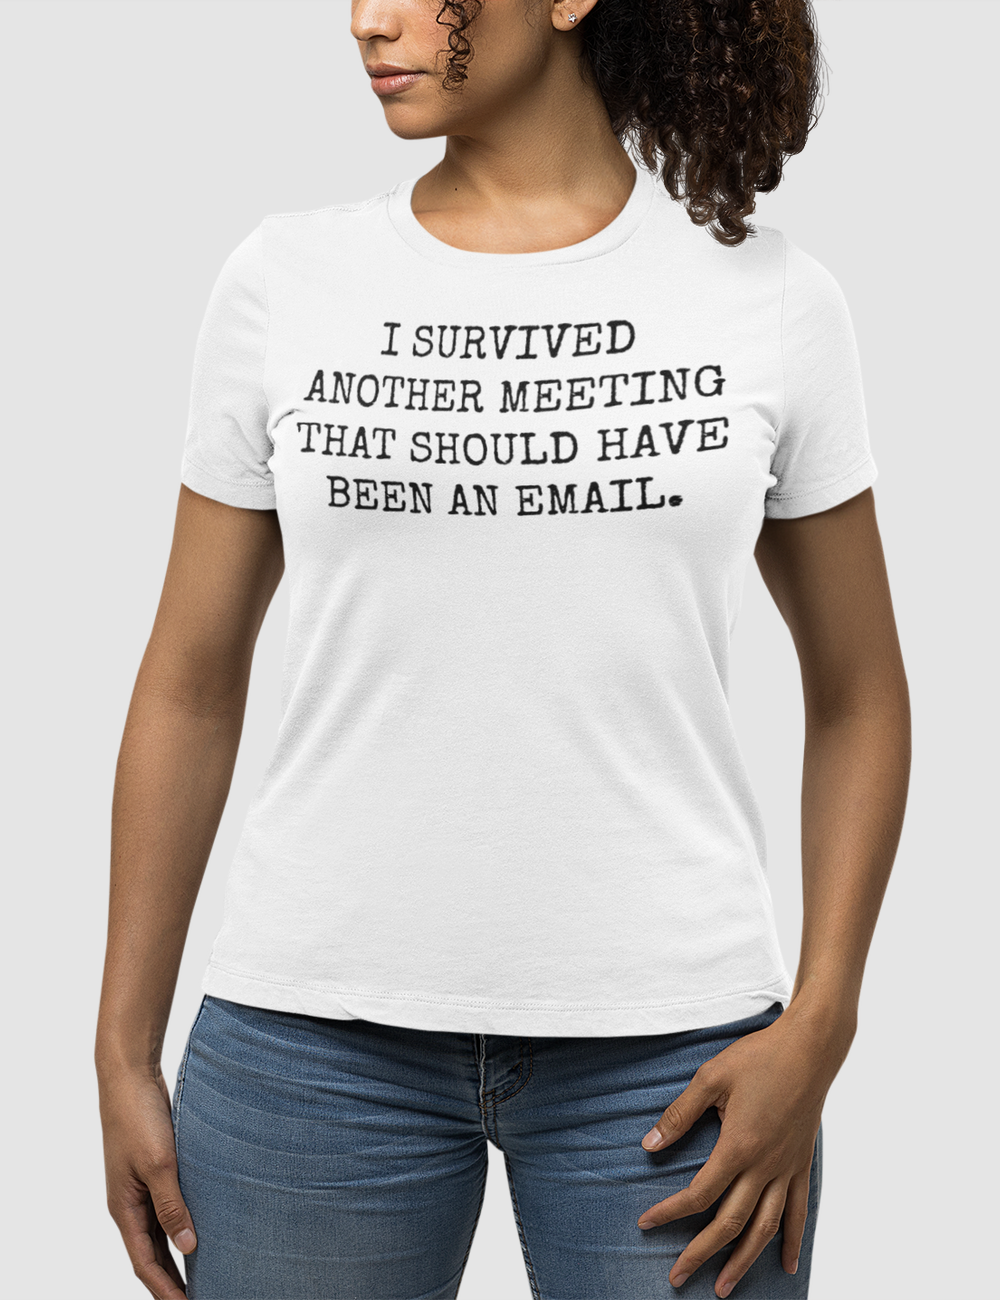 I Survived Another Meeting | Women's Fitted T-Shirt OniTakai